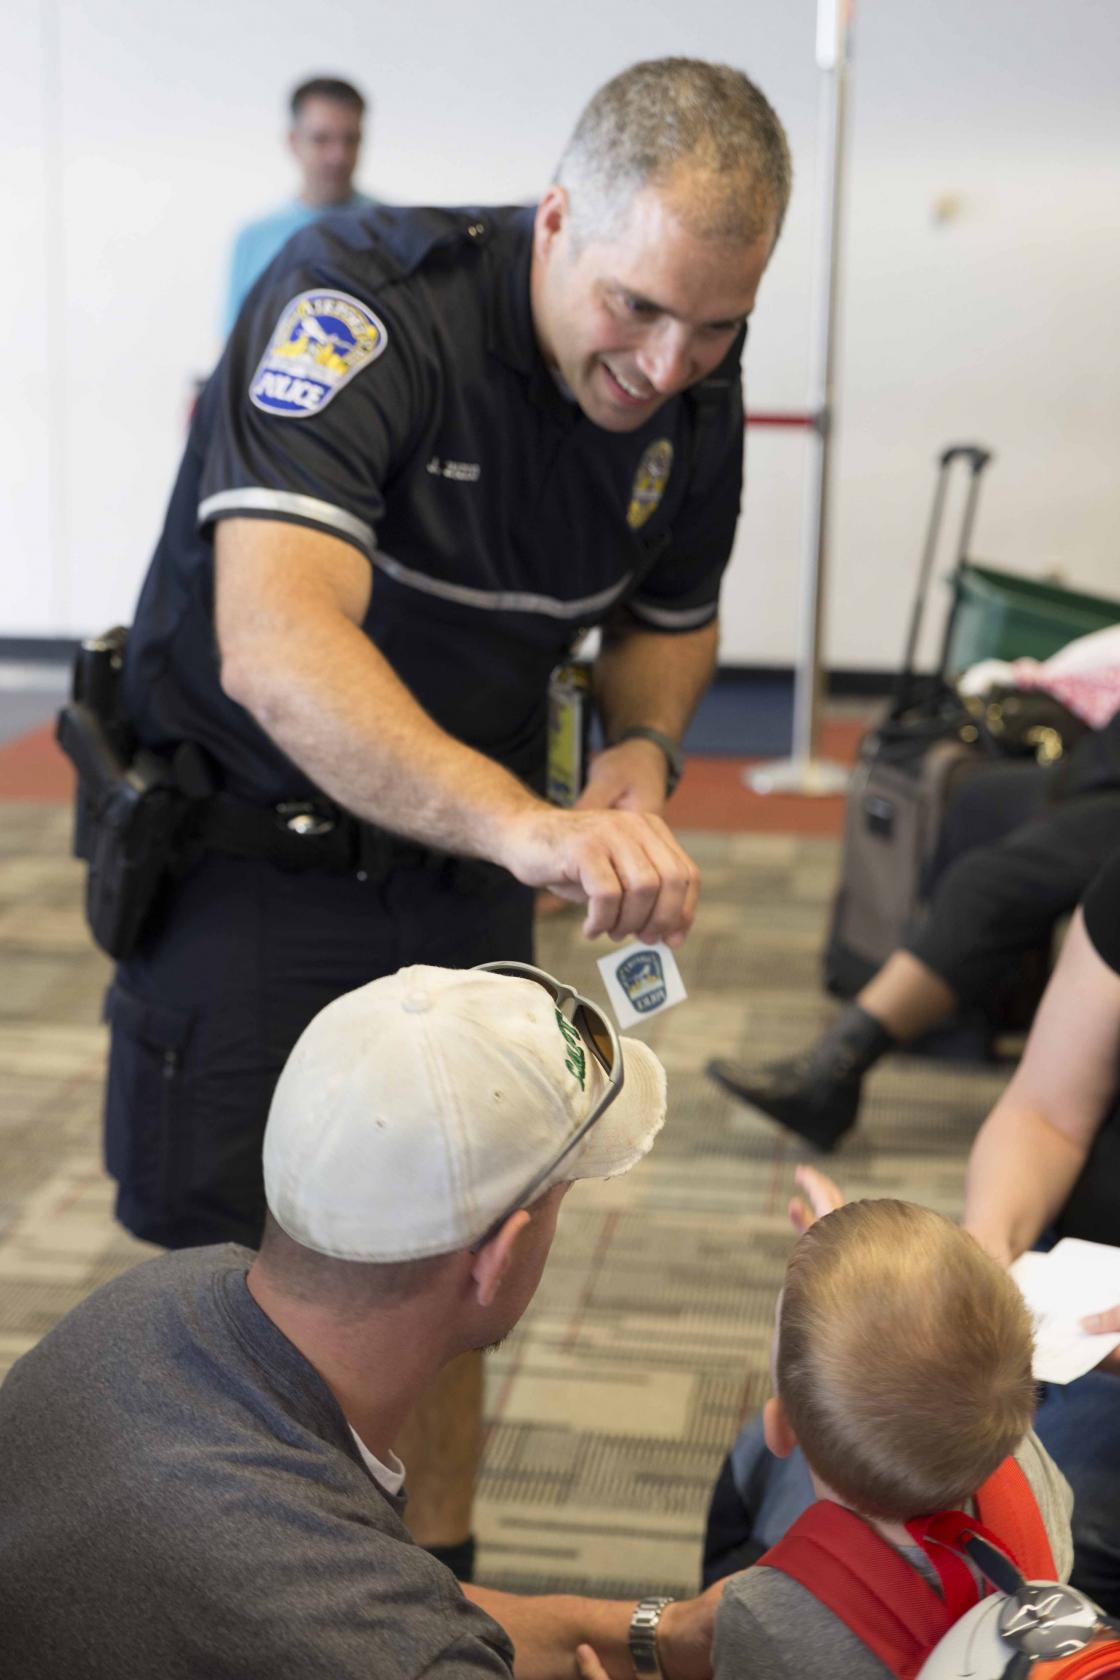 Officer handing out badge stickers